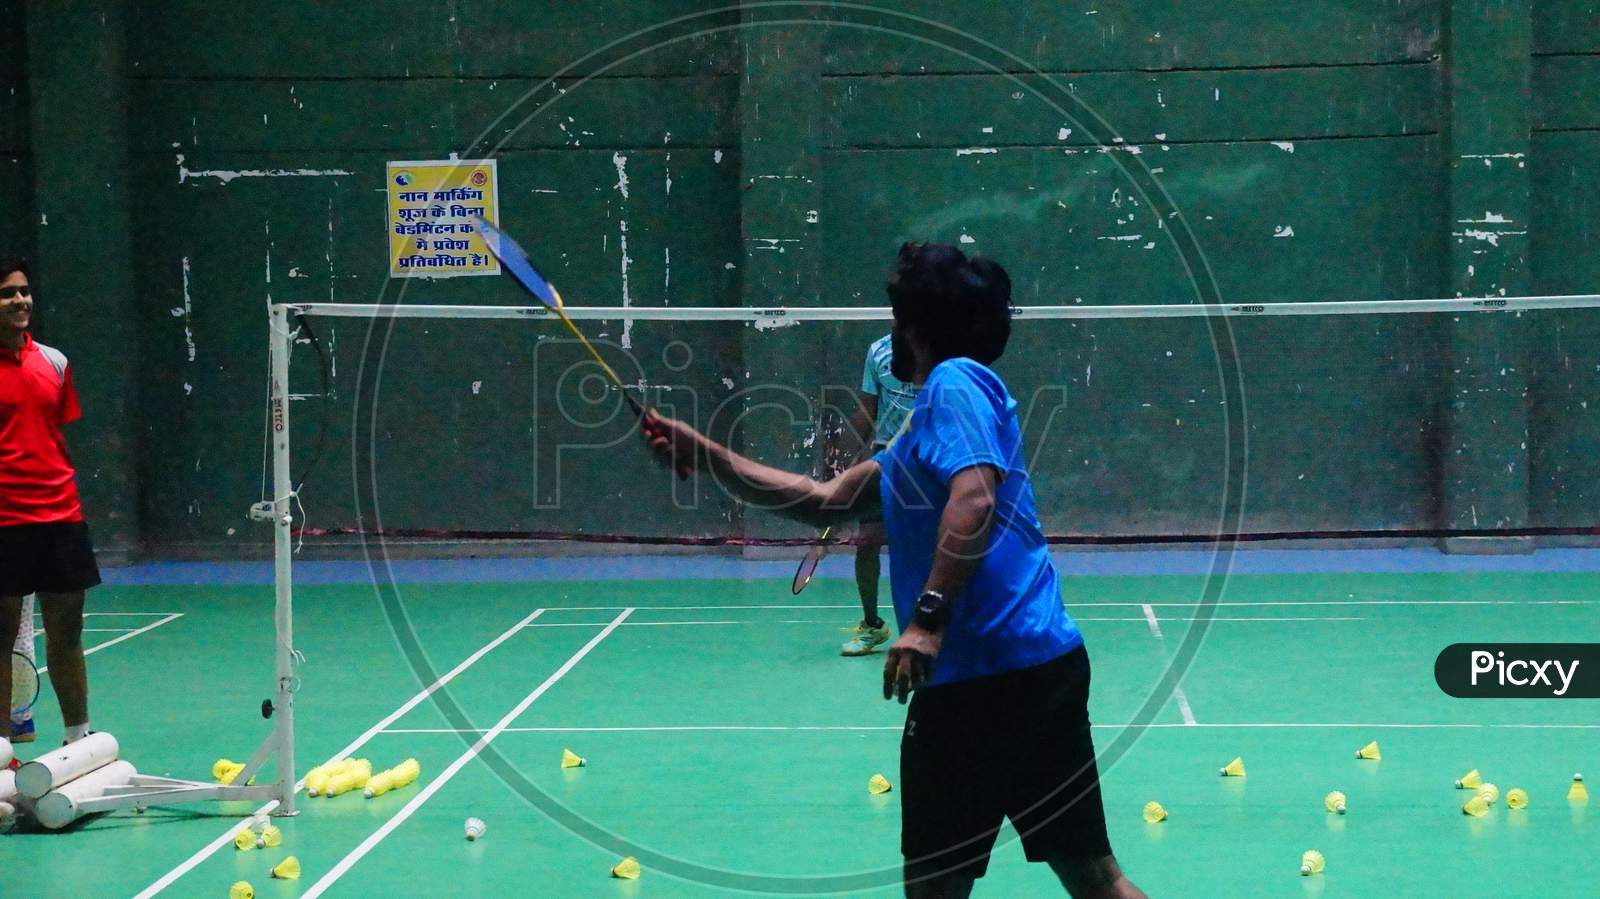 Badminton Coach conducting rally practice with trainee badminton player